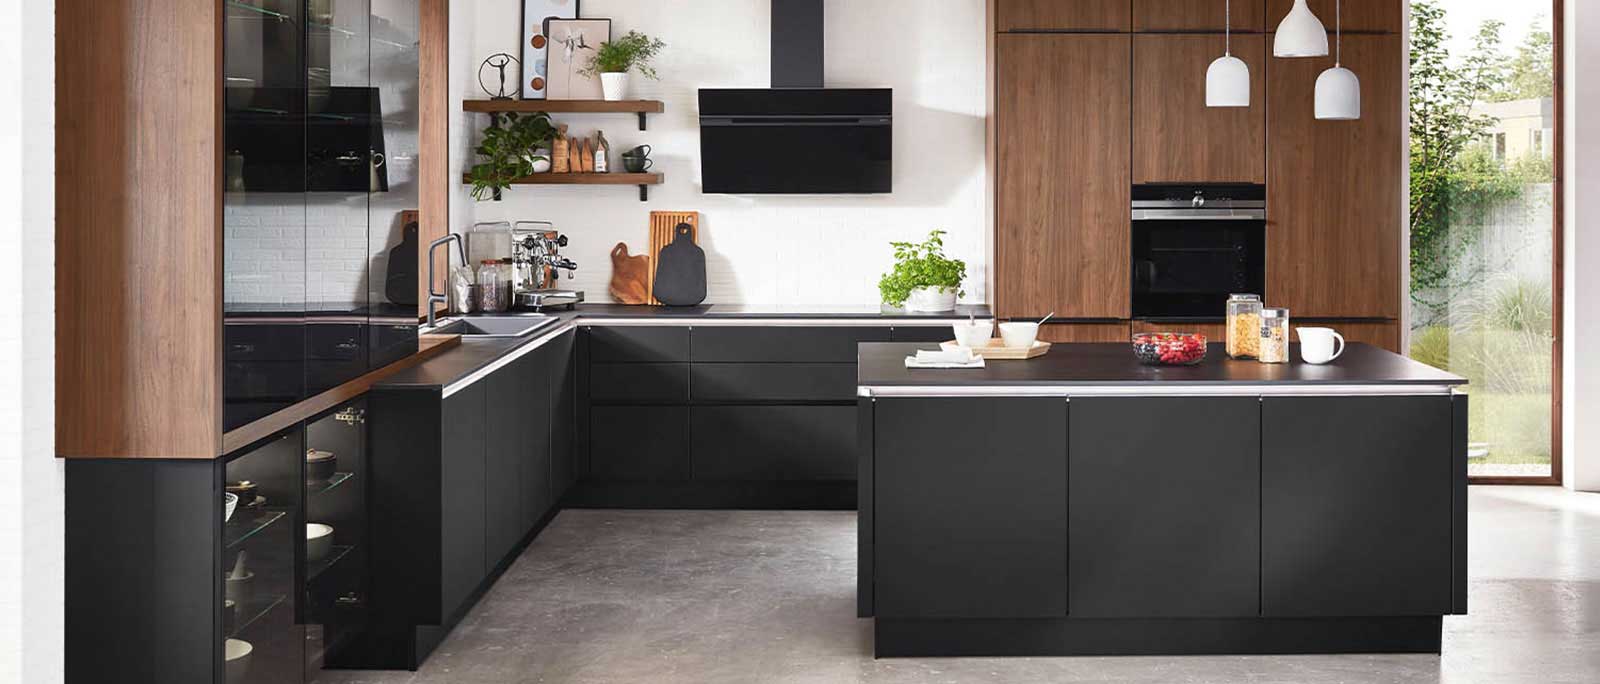 What are trending sustainable Modular kitchen designs